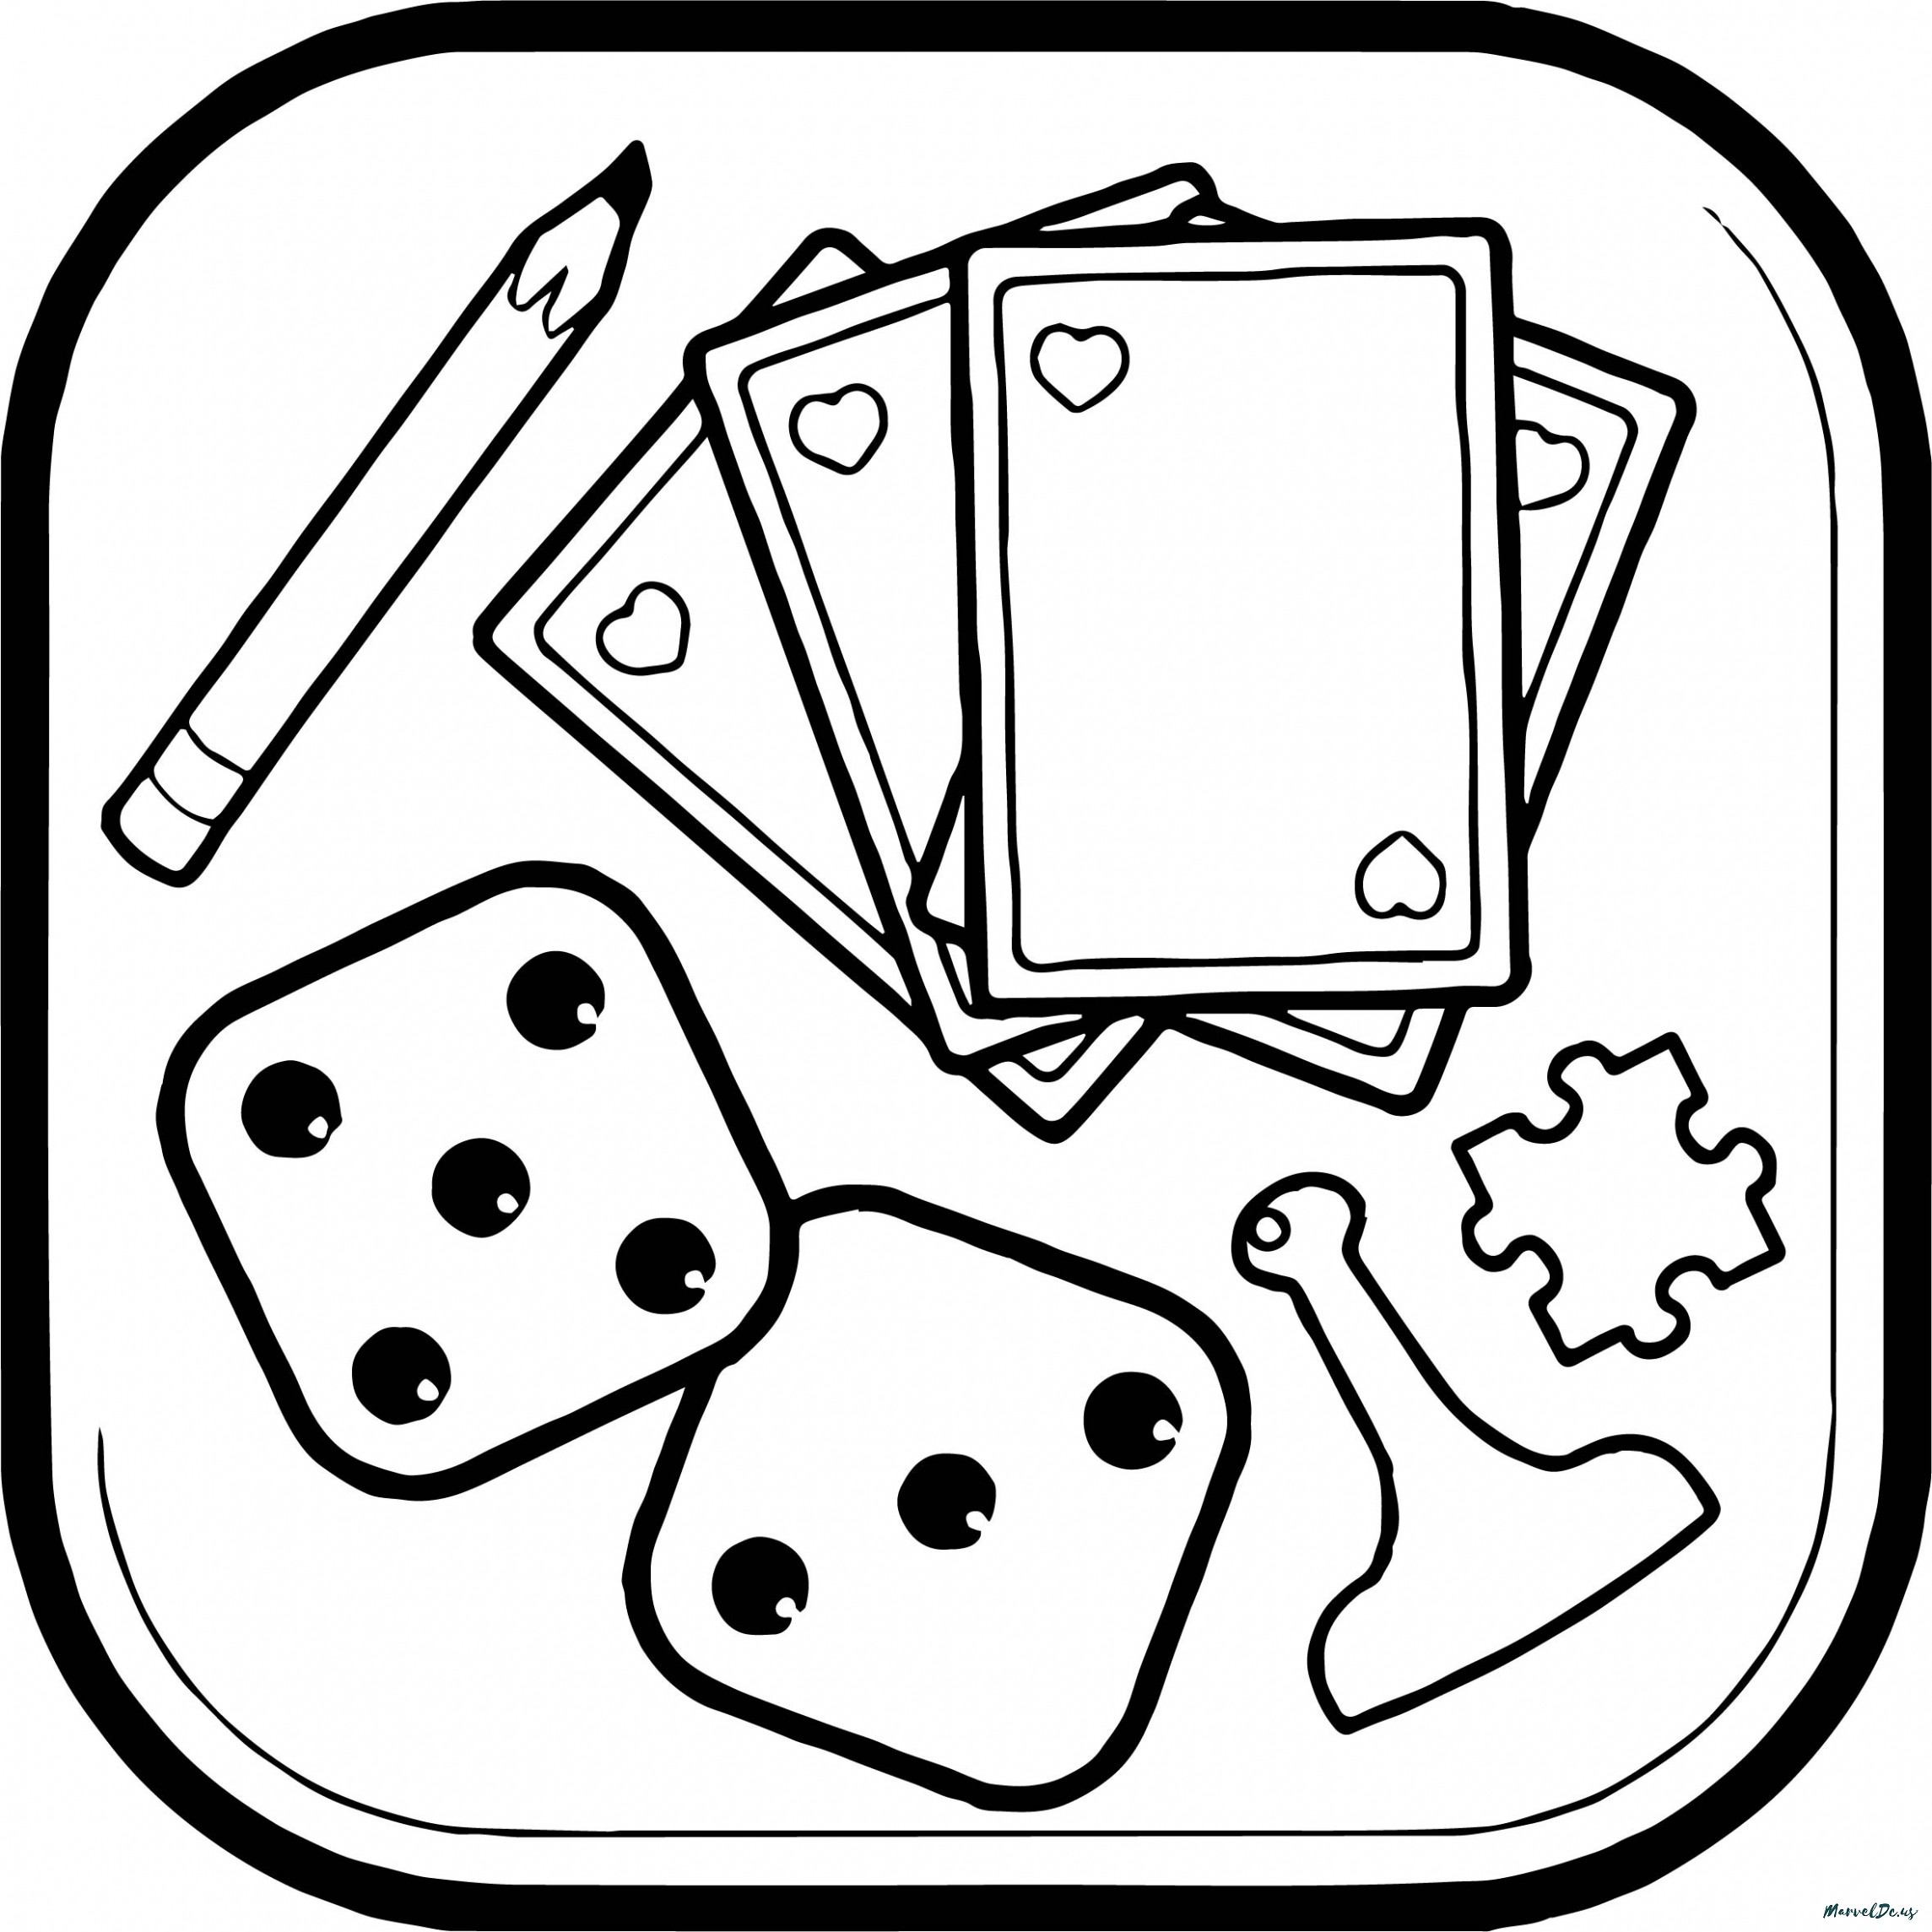 Coloring Games: Coloring Book & Painting instal the last version for android